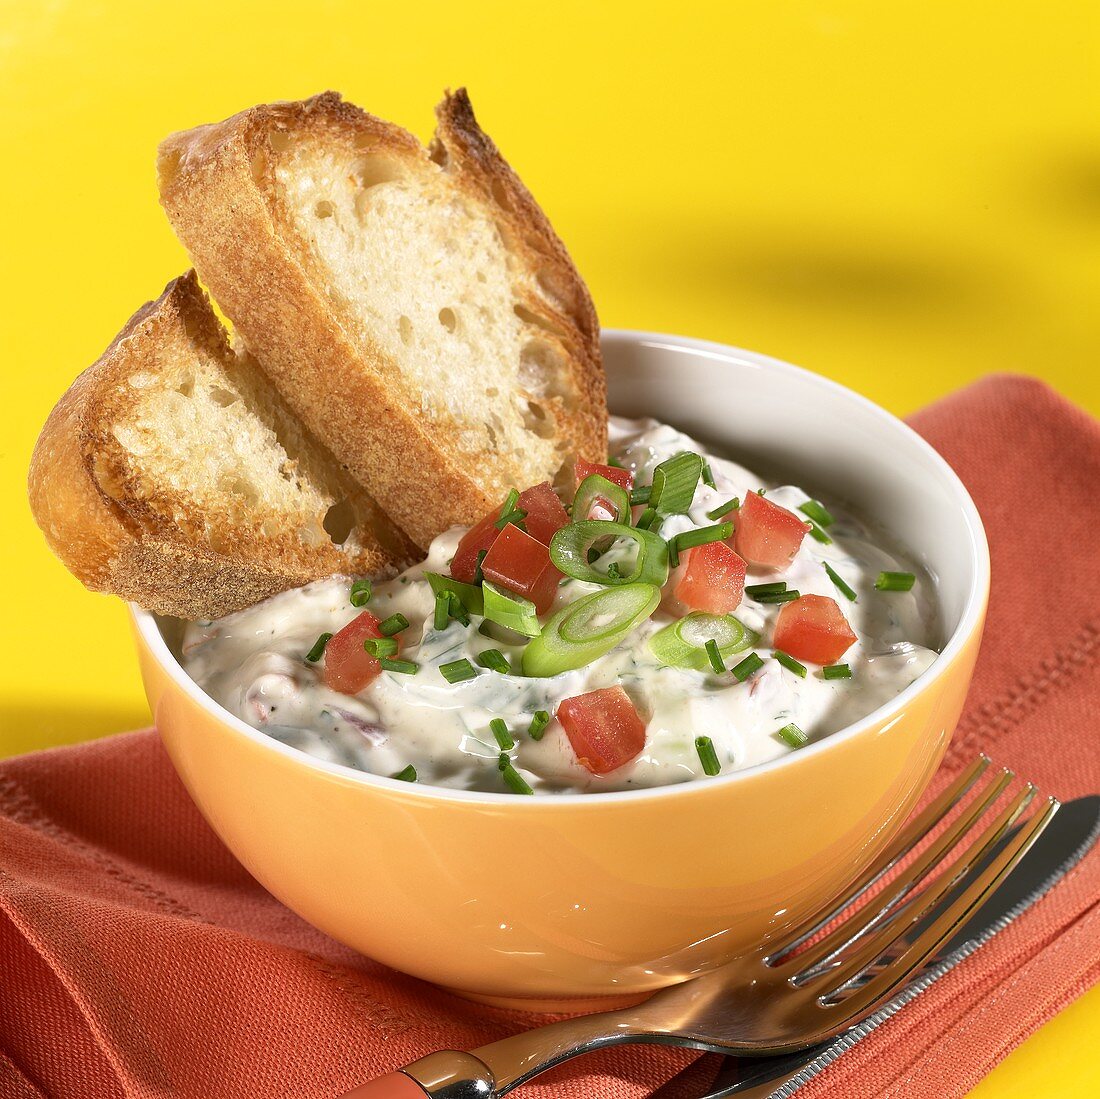 Tomato & spring onion quark with slices of bread in bowl